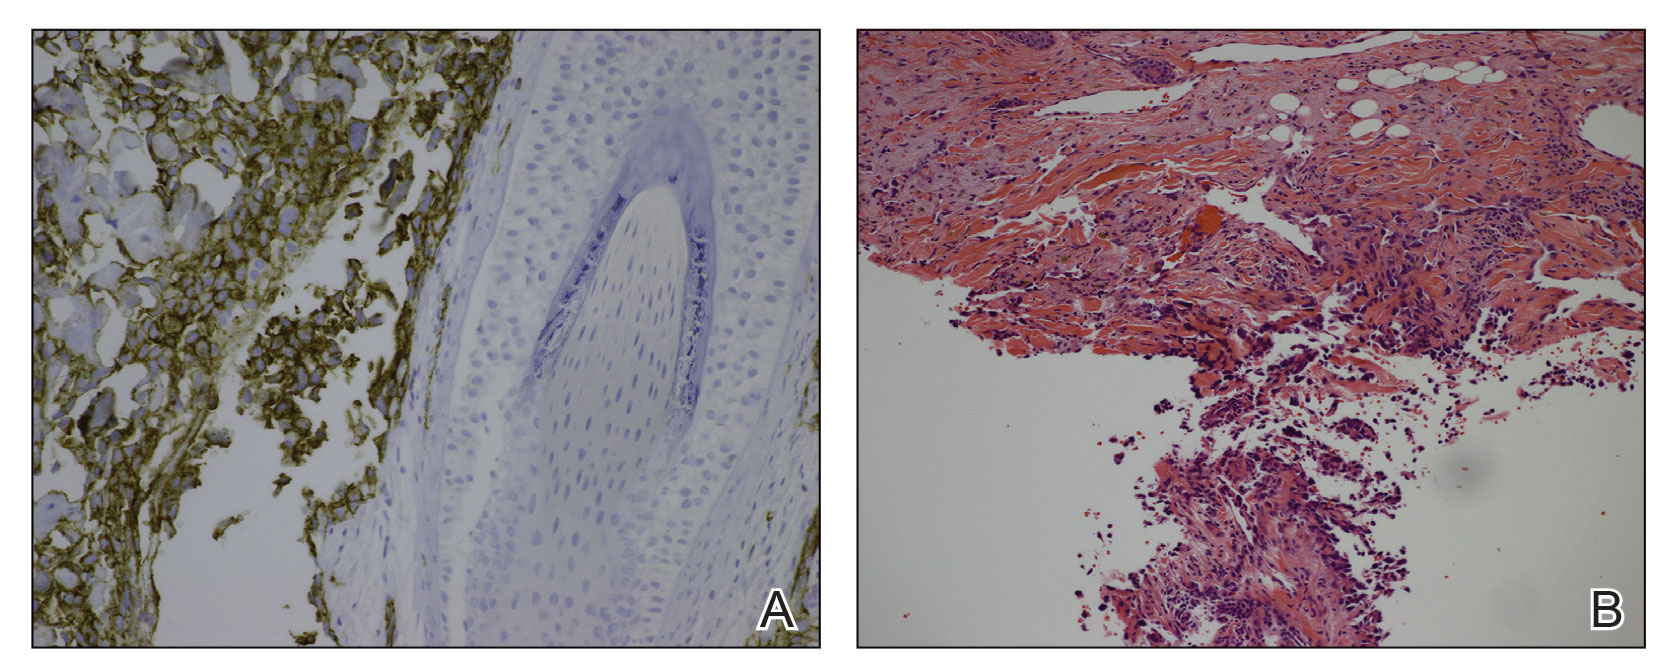 A, A punch biopsy of the right parietal scalp showed cytologically atypical endothelial cells forming slitlike vascular spaces in the dermis (H&E, original magnification ×100). B, Cytoplasmic CD31 staining of endothelial lining of slit-like atypical